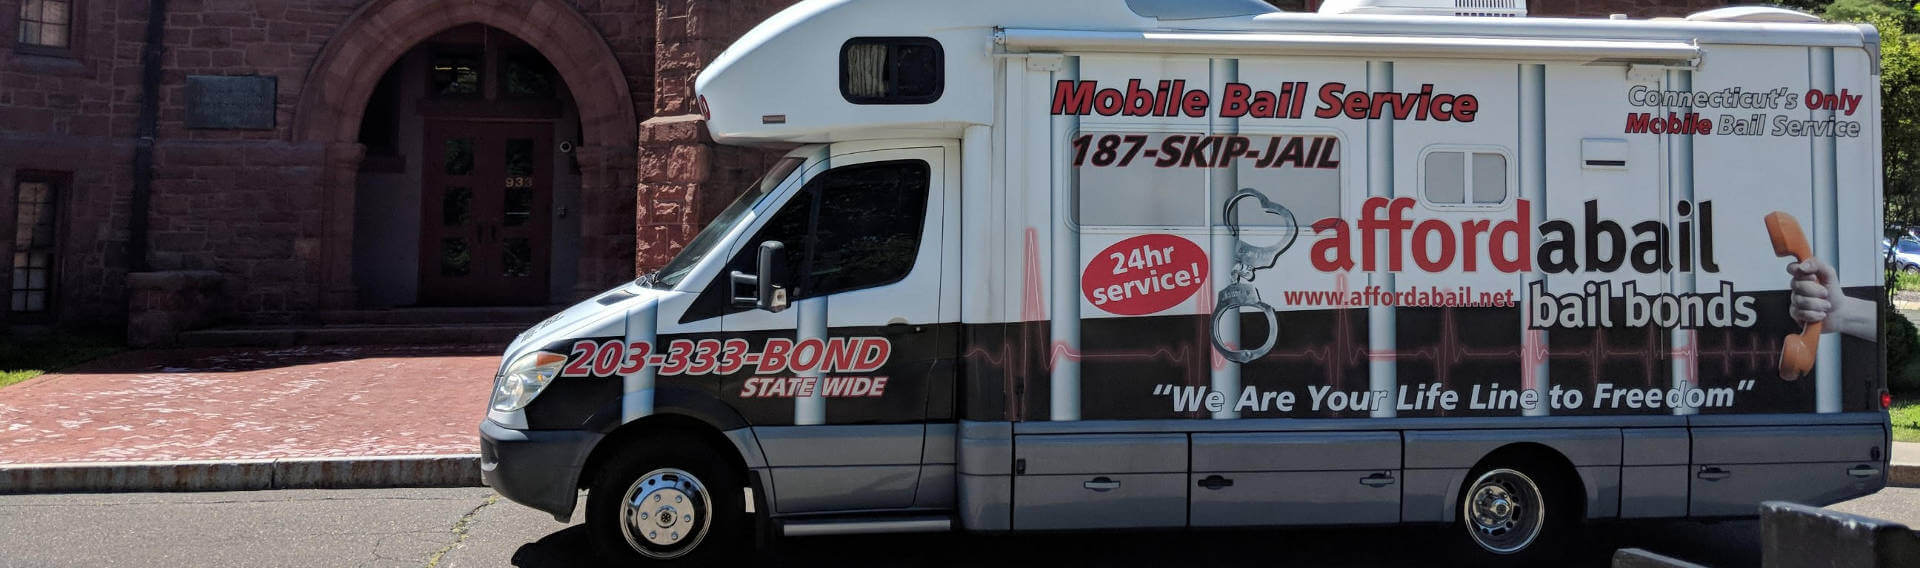 Mobile bail bonds service in New Milford CT